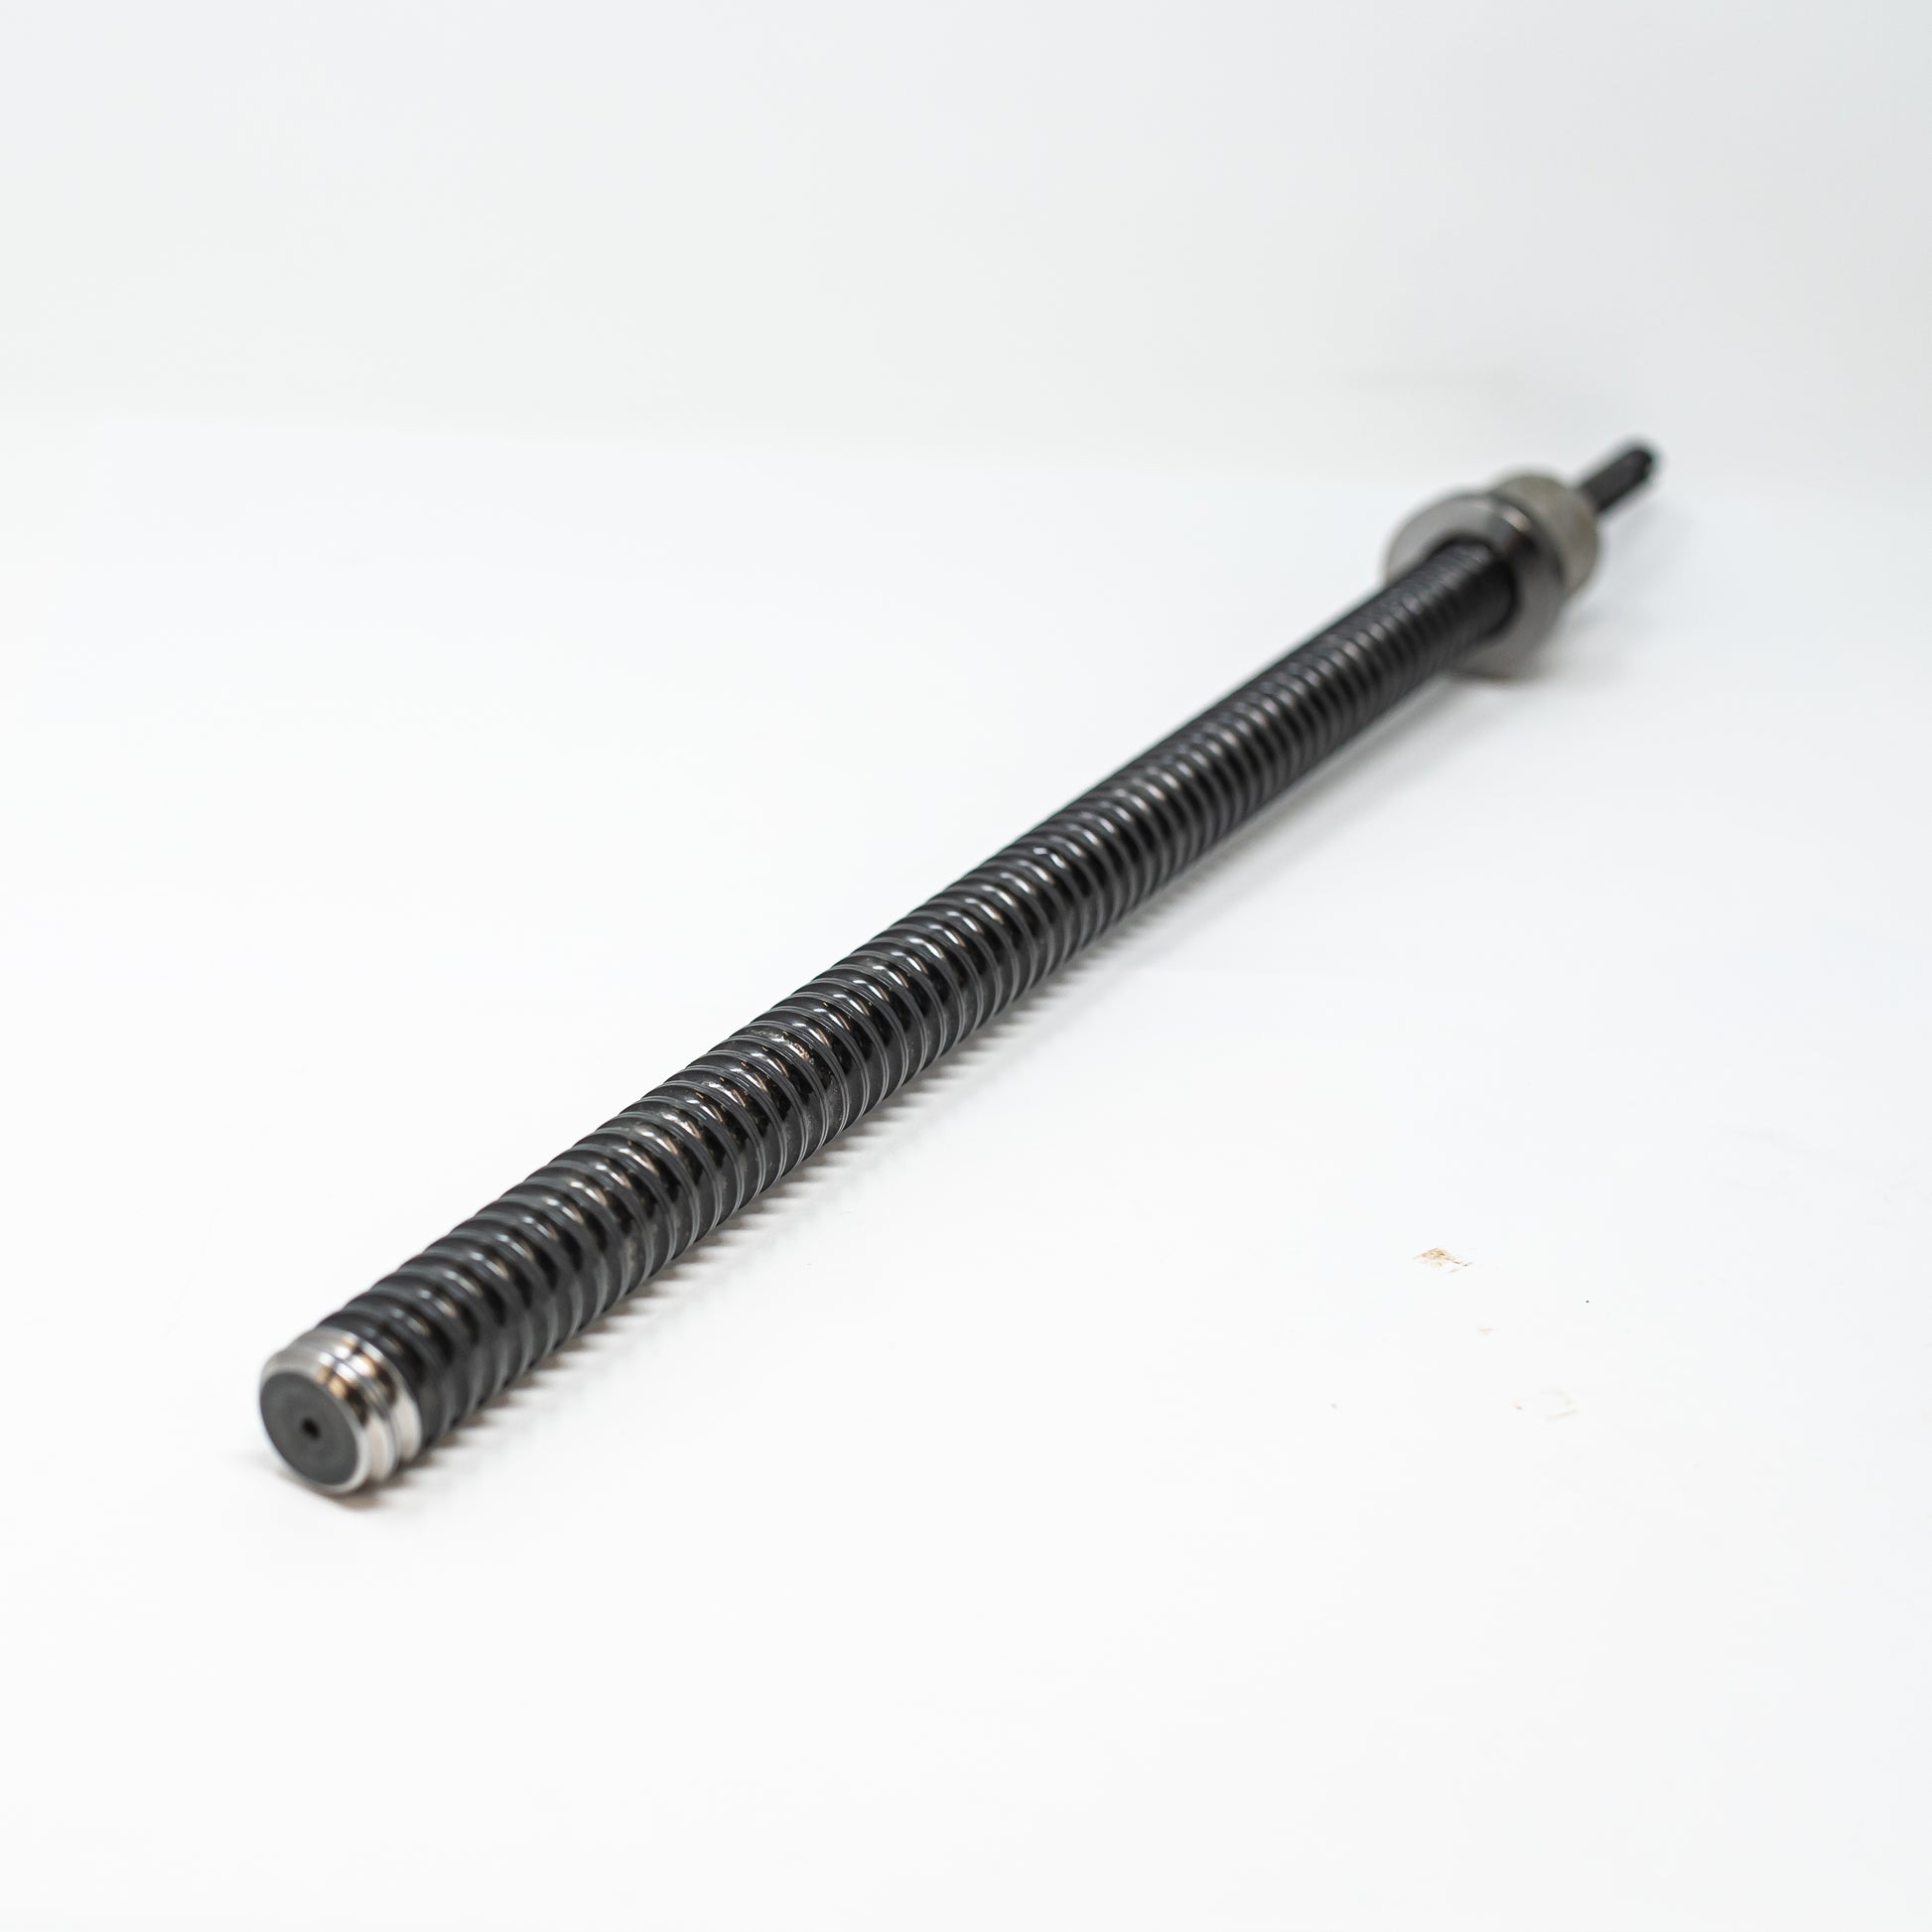 Ball screw assembly. 